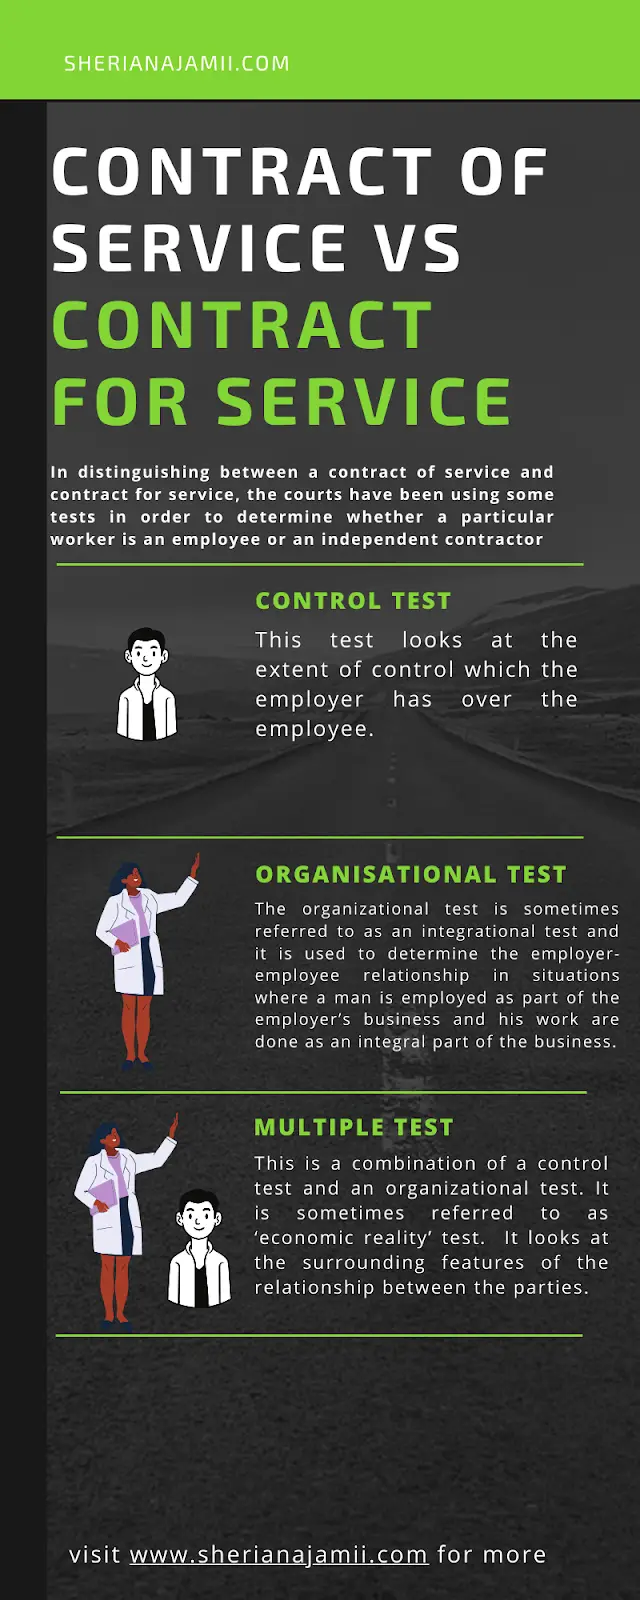 Different Between a Contract of Service and Contract for Service